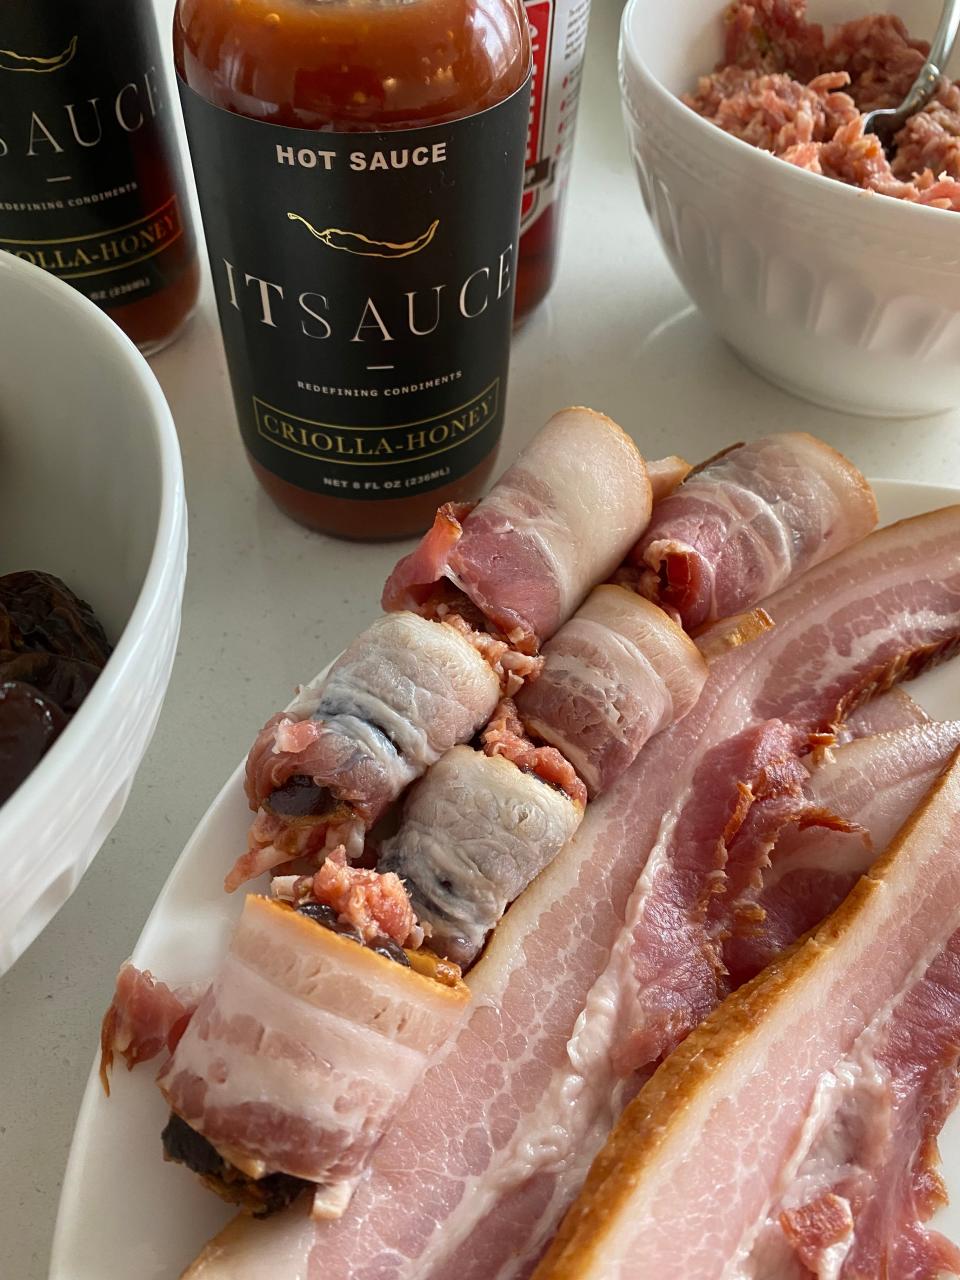 New cooks may be wary of dates. Fear not, as long as you buy pitted dates, this bacon-wrapped appetizer is easier to make than stuffed jalapeno versions.